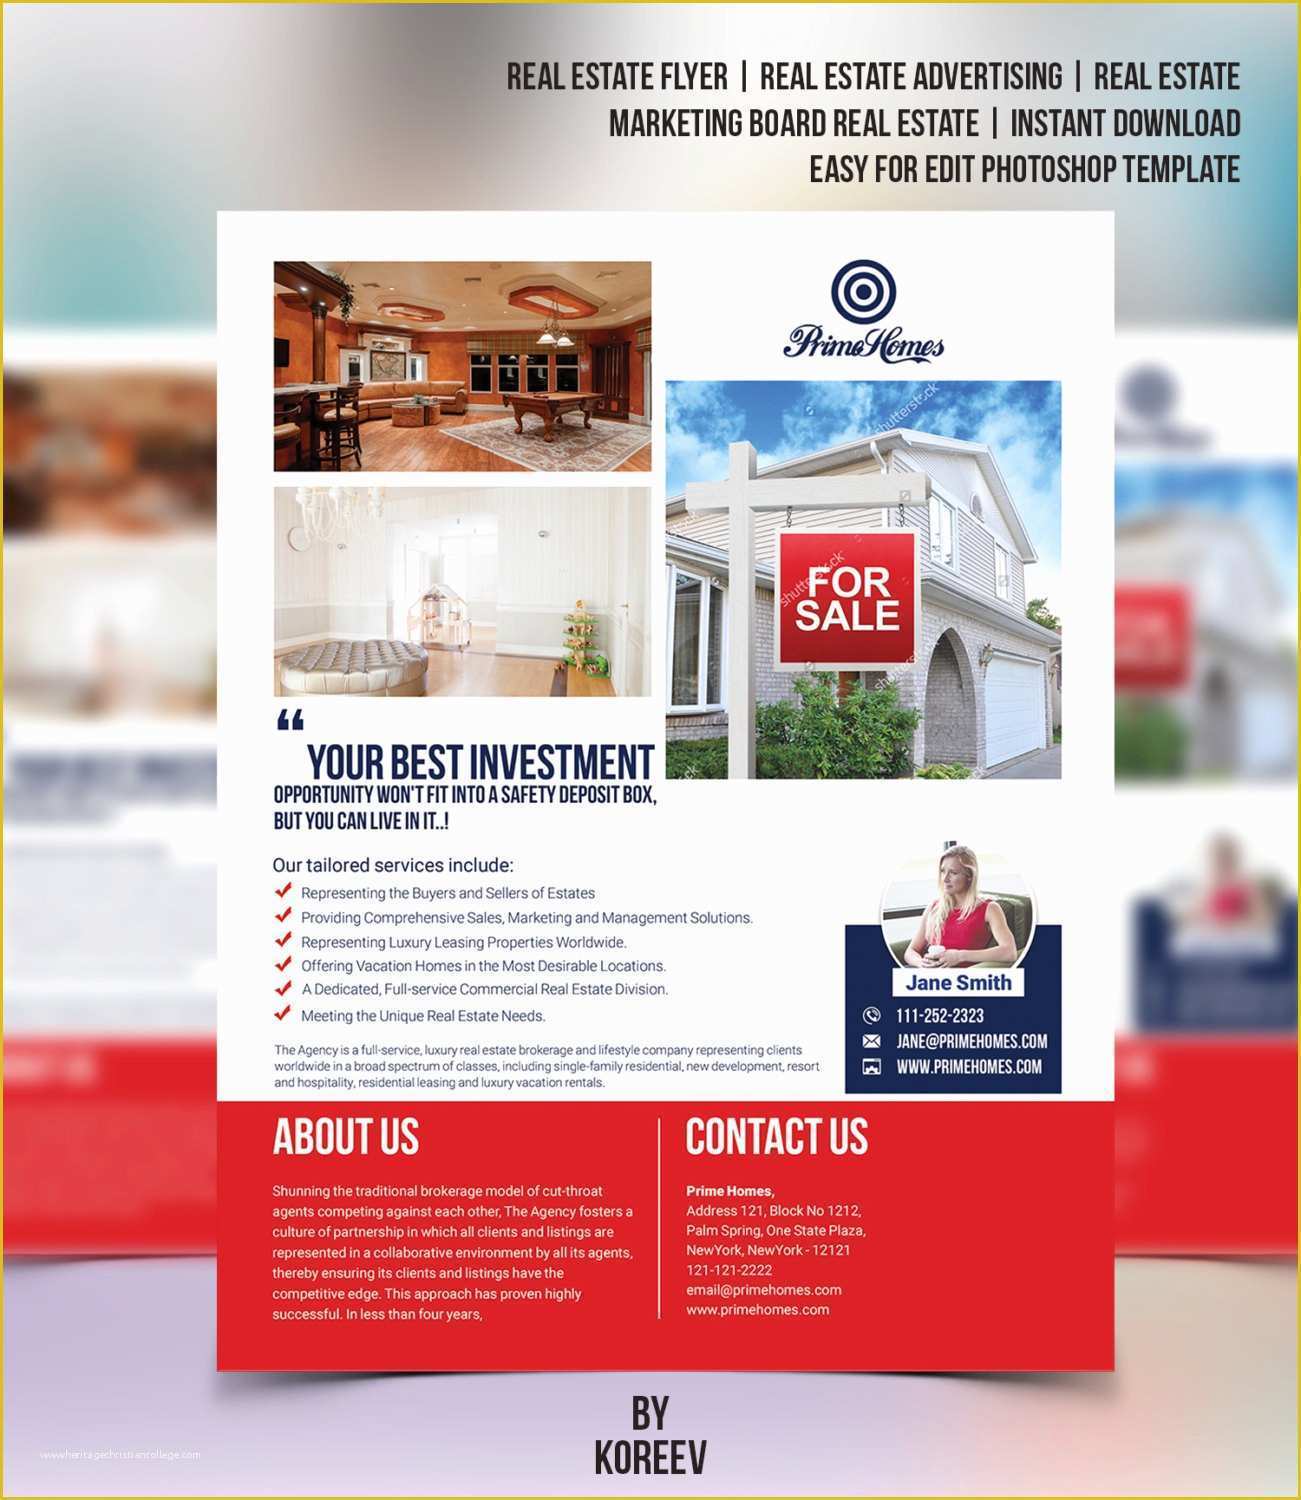 Real Estate Flyer Template Free Download Of Real Estate Flyer Editable In Microsoft Word Powerpoint